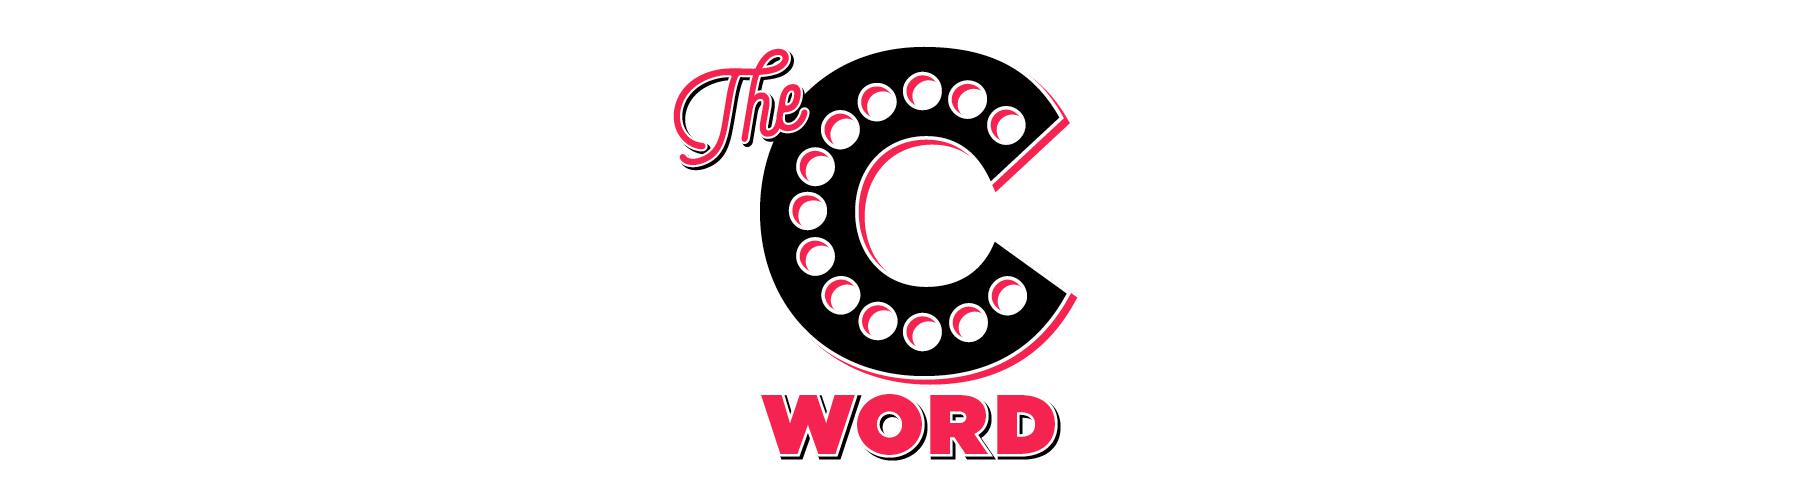 TopIC Banner - The C word. Building confidence in the workplace